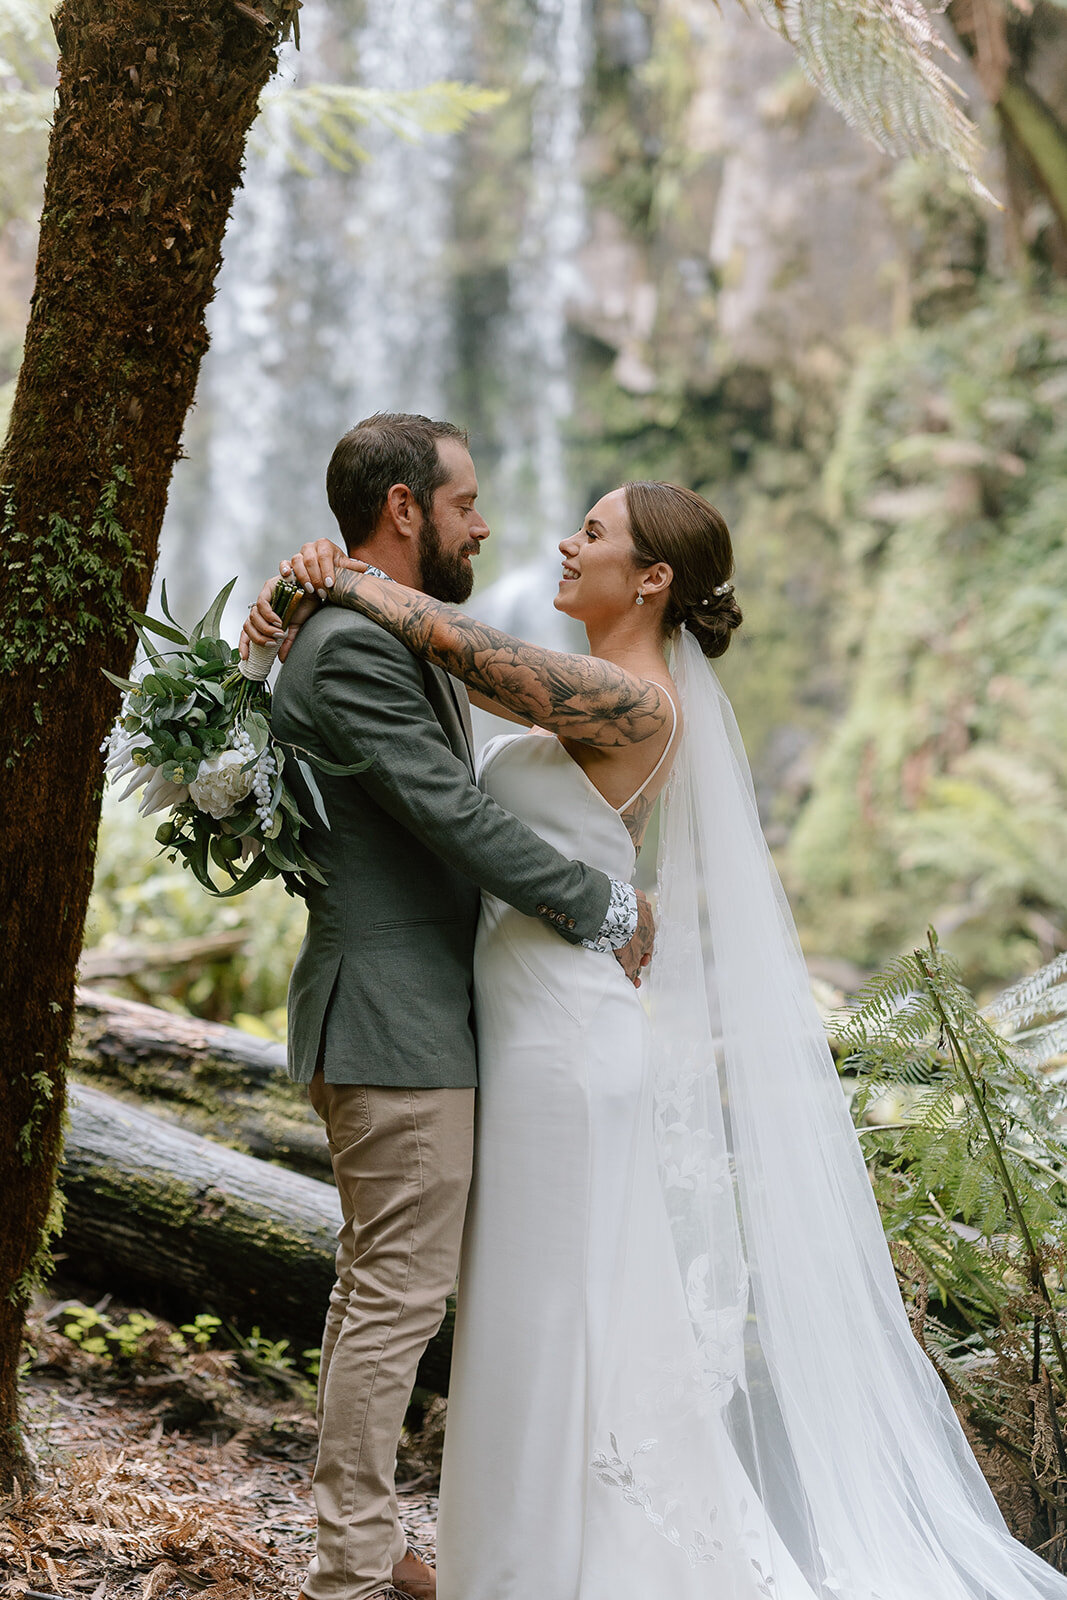 Stacey&Cory-Coast&Pines-299